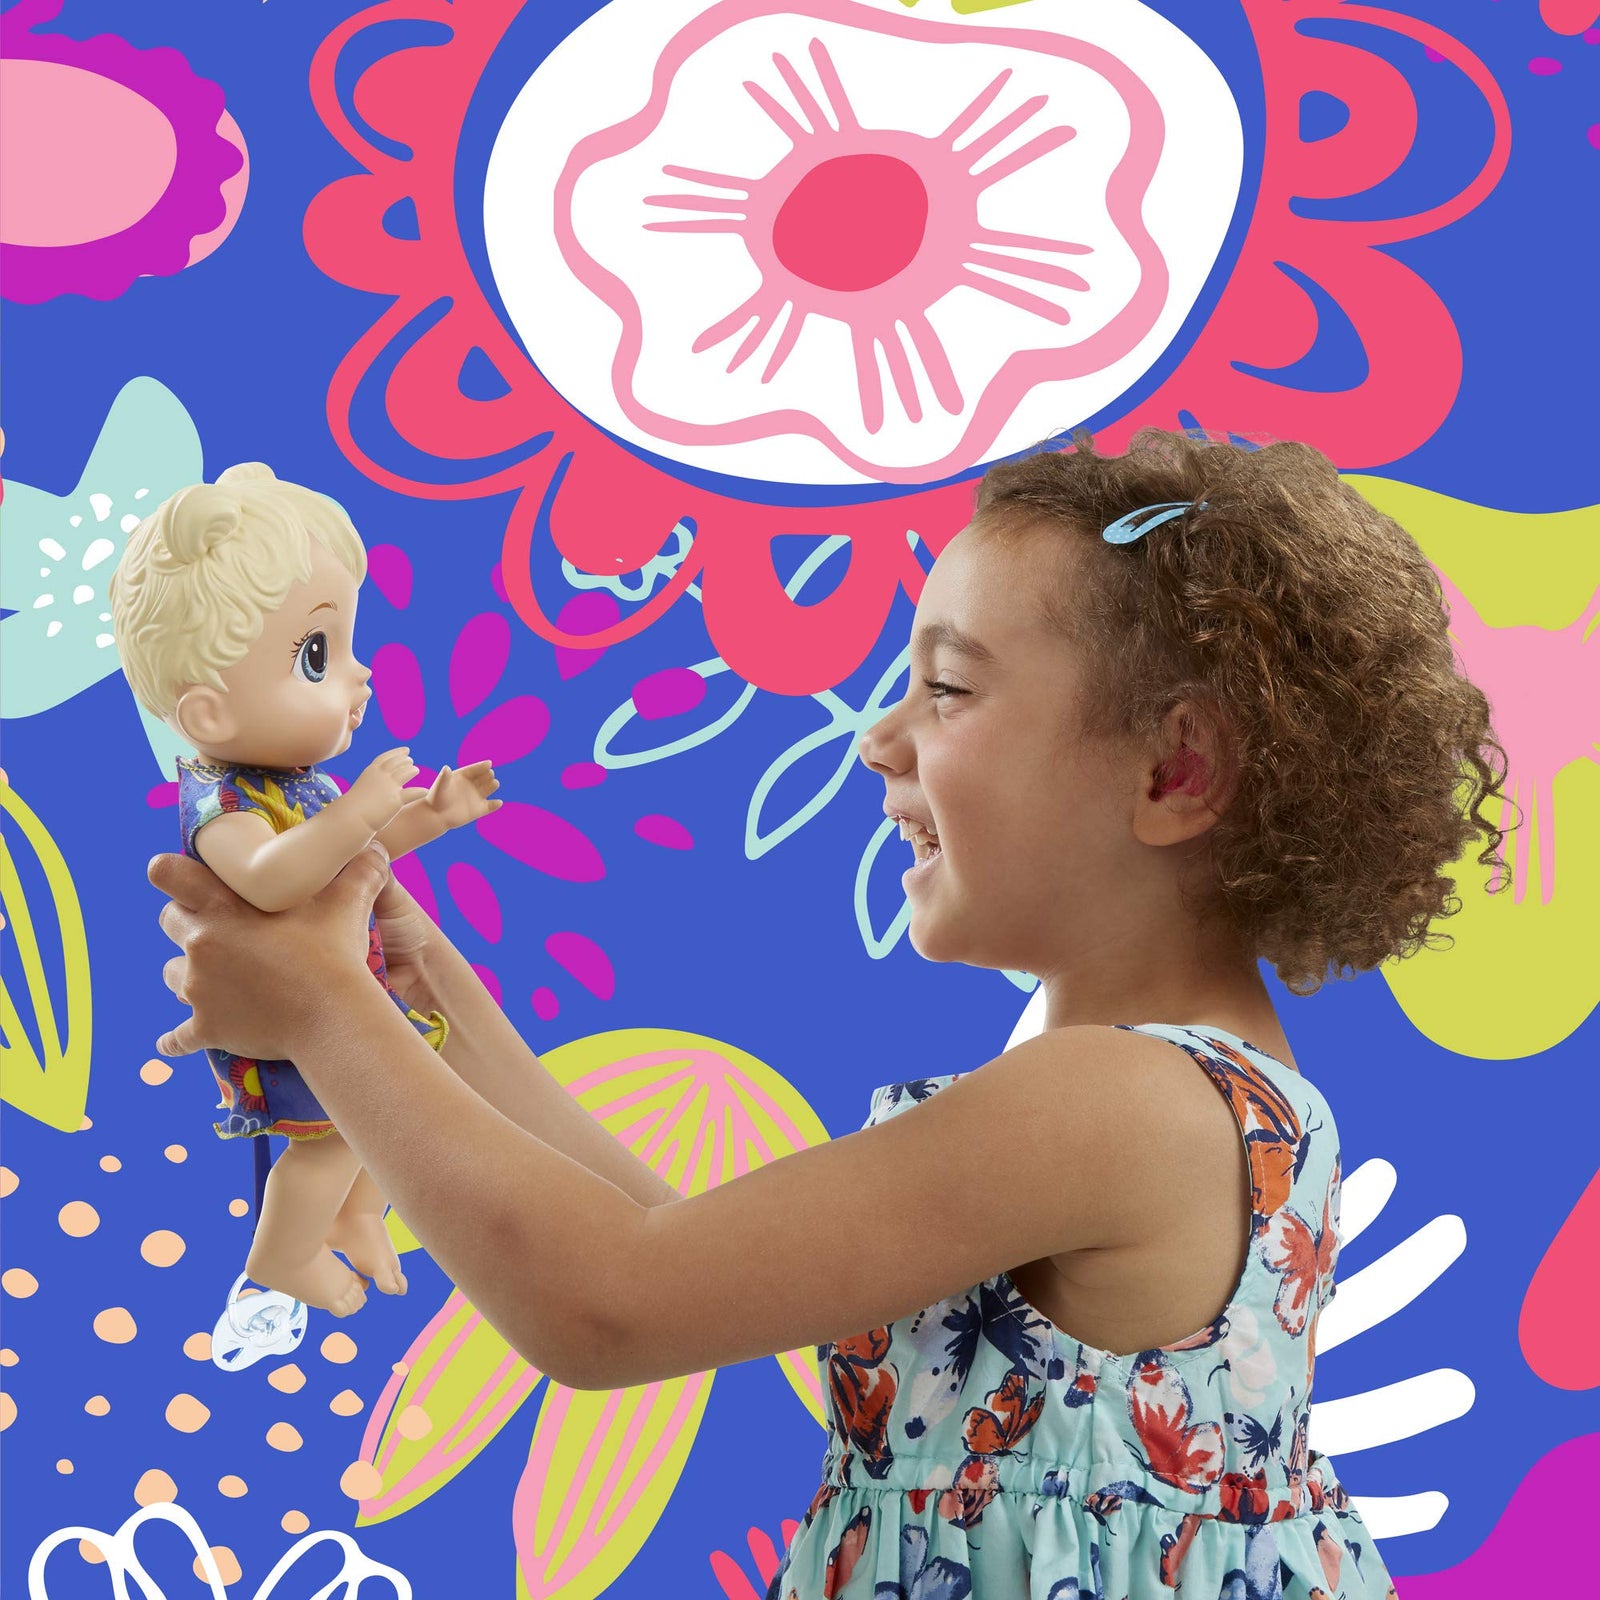 Baby Alive Baby Lil Sounds: Interactive Baby Doll for Girls & Boys Ages 3 & Up, Makes 10 Sound Effects, Including Giggles, Cries, Baby Doll with Pacifier